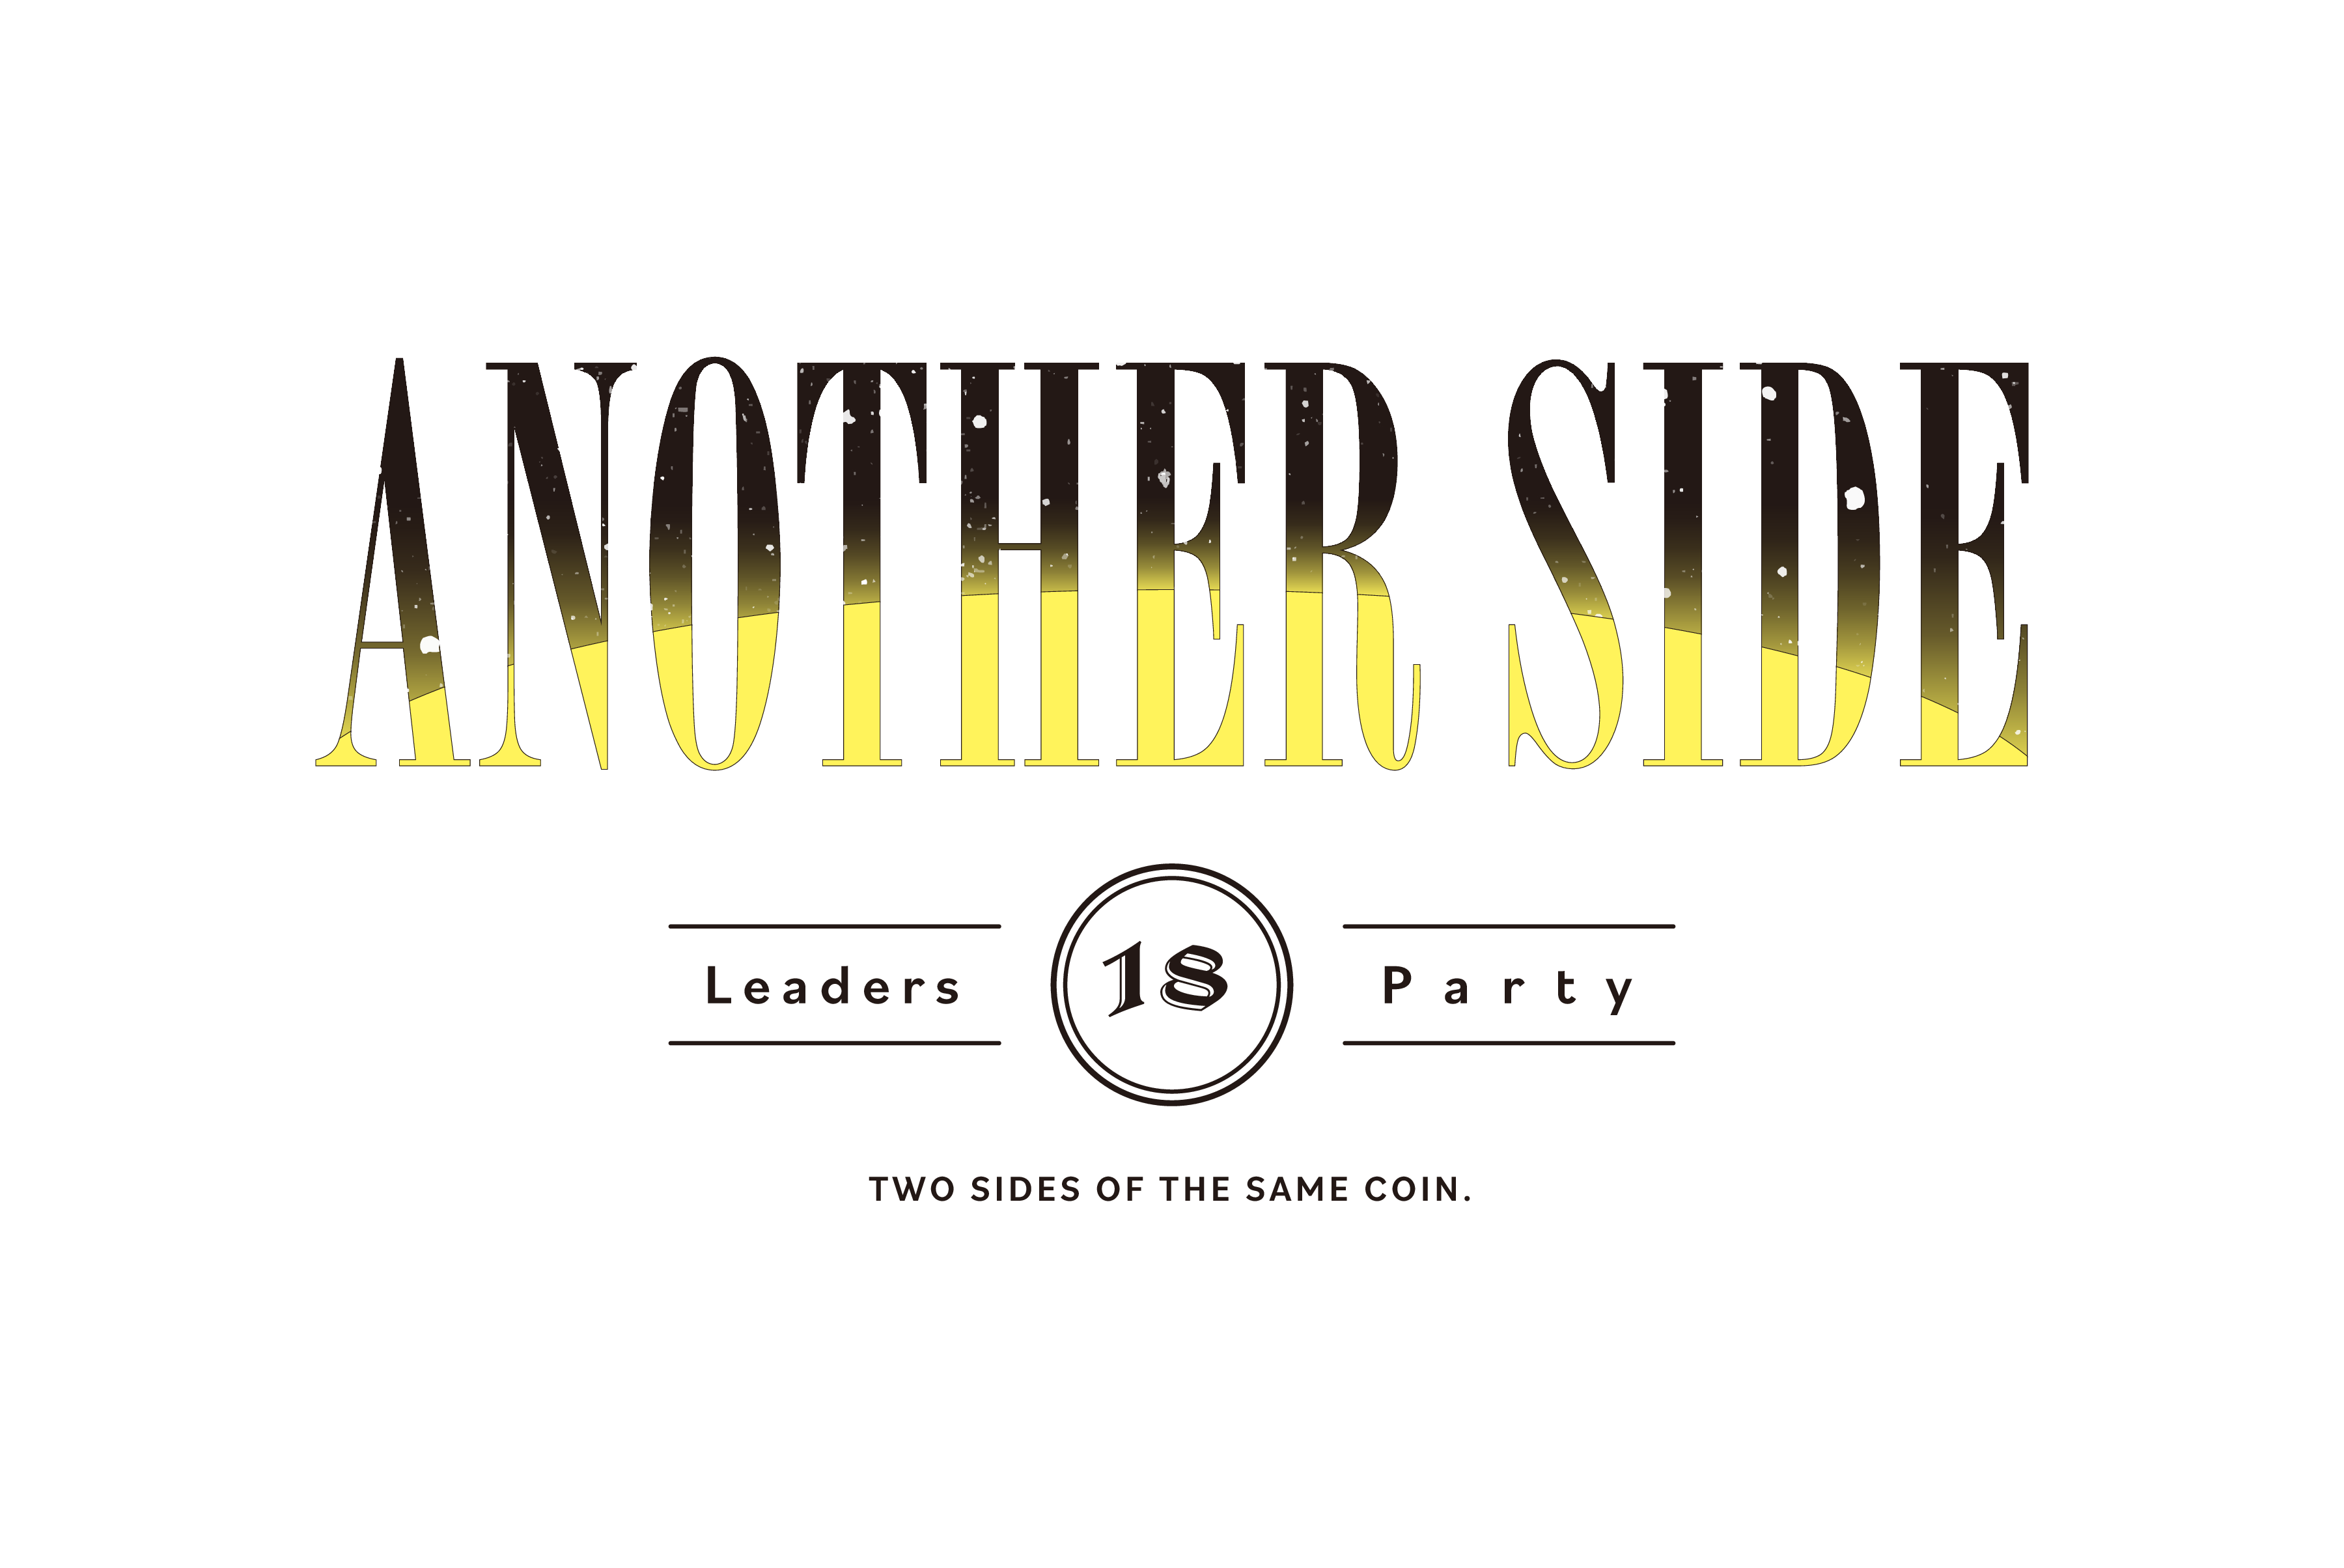 「Leaders Party 18!～Another Side～」ファンクラブ先着販売受付中！